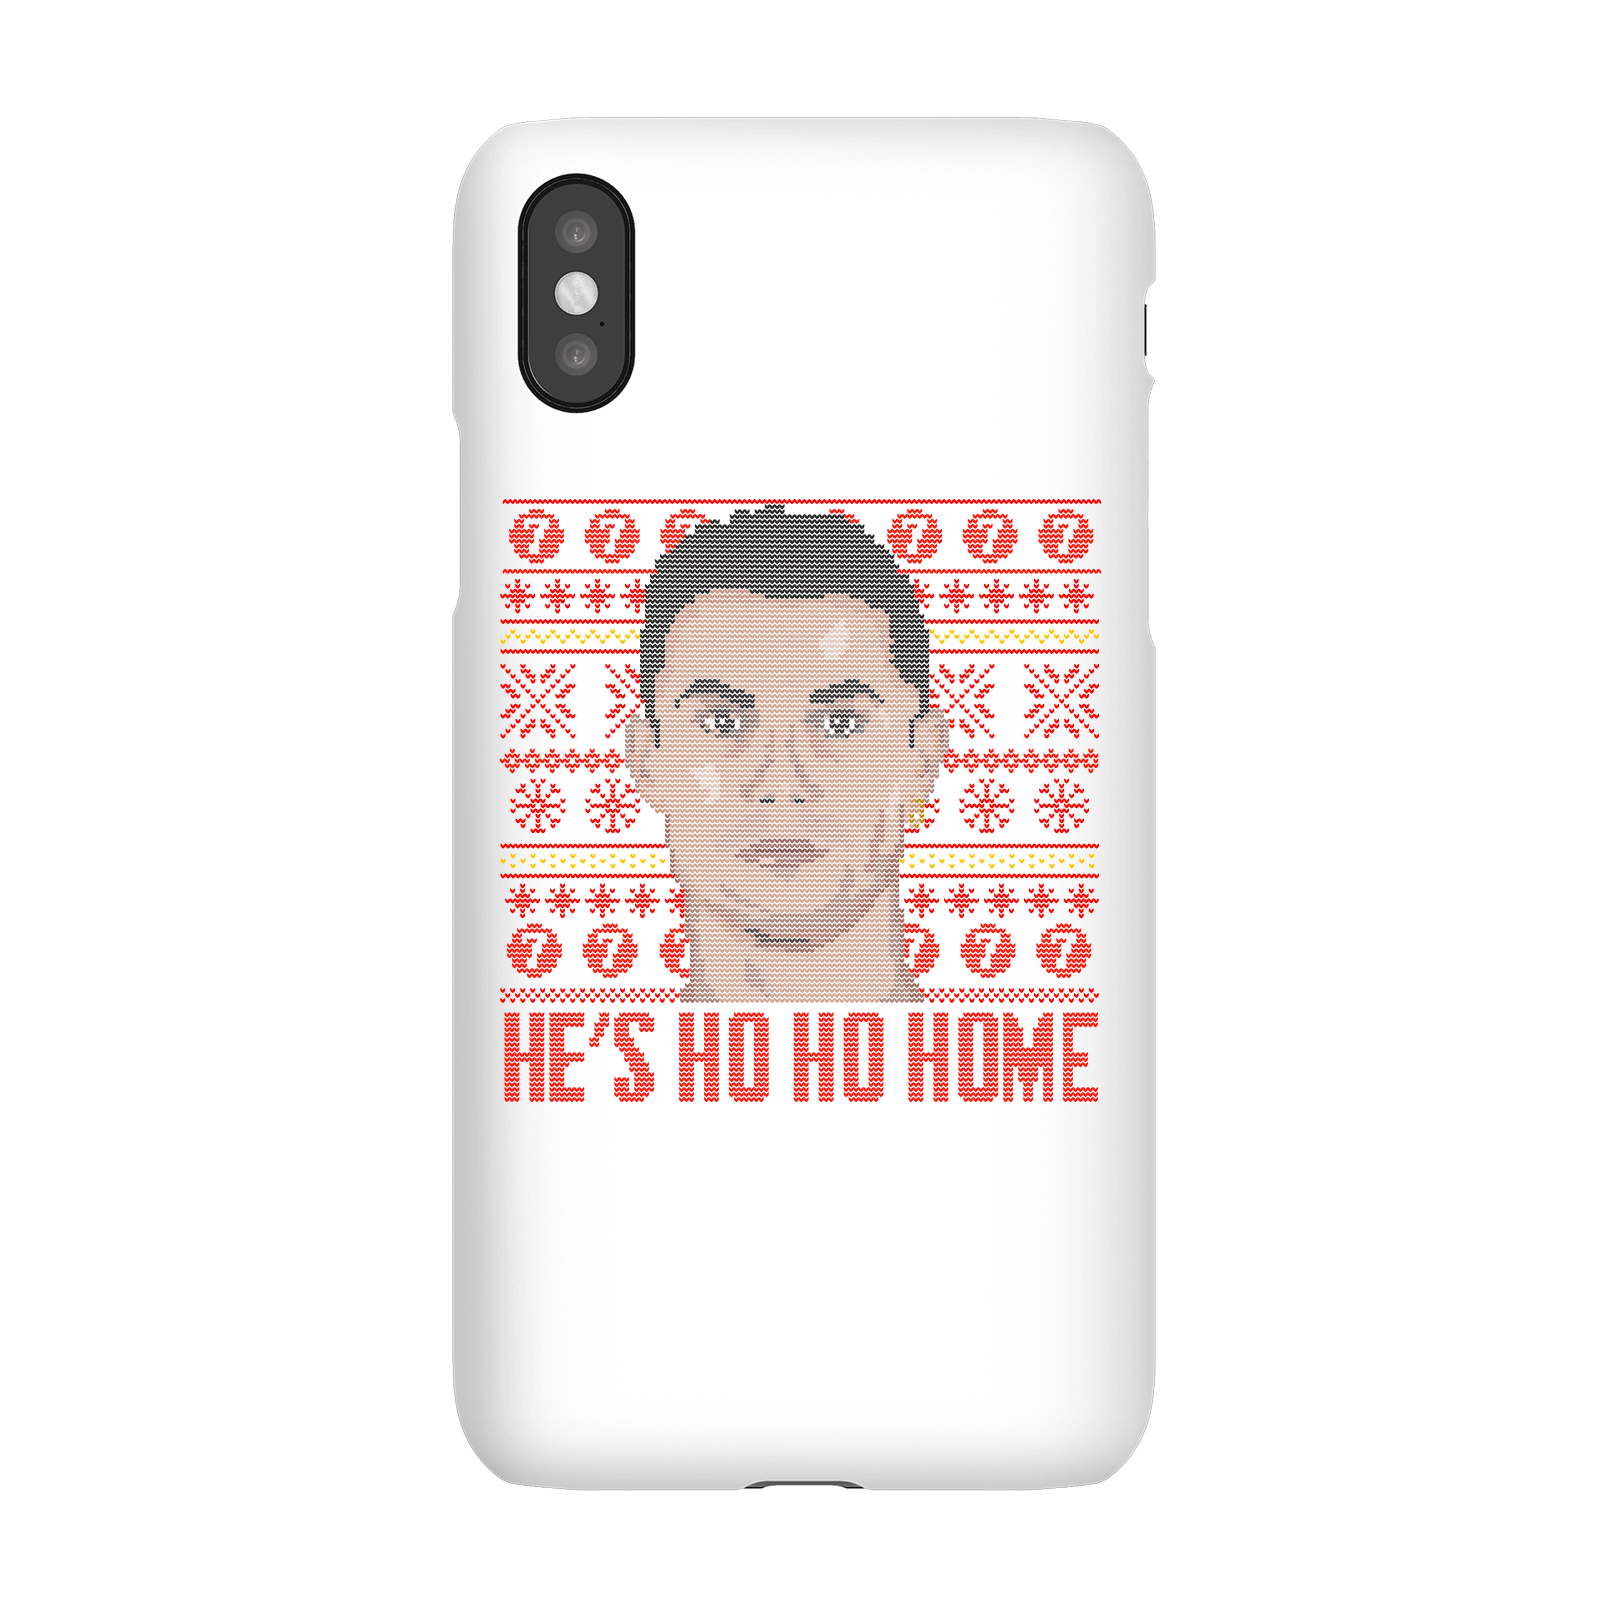 He's Coming Ho Ho Home Phone Case for iPhone and Android - iPhone 5C - Snap Case - Matte